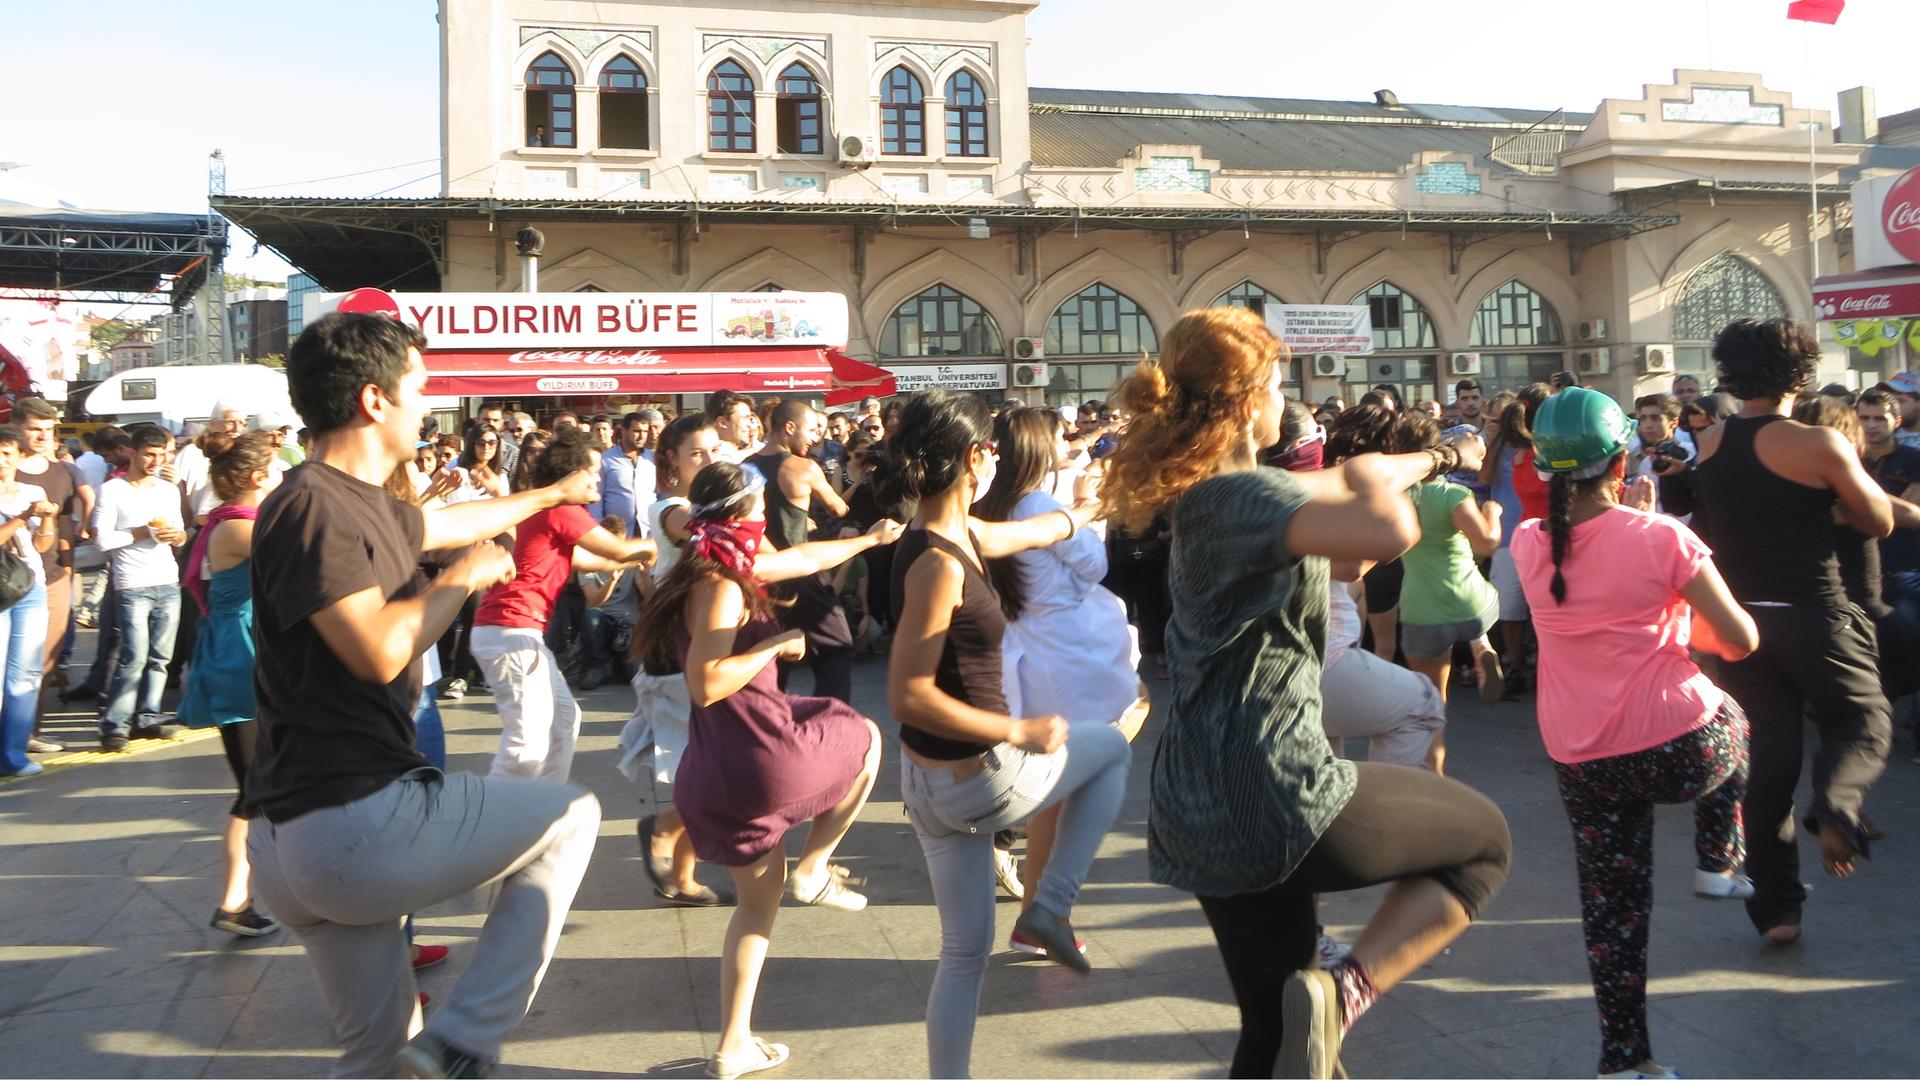 Flash mob protesters perform near an outdoor concert, just outside one of Istanbul's heavily used ferry stations.